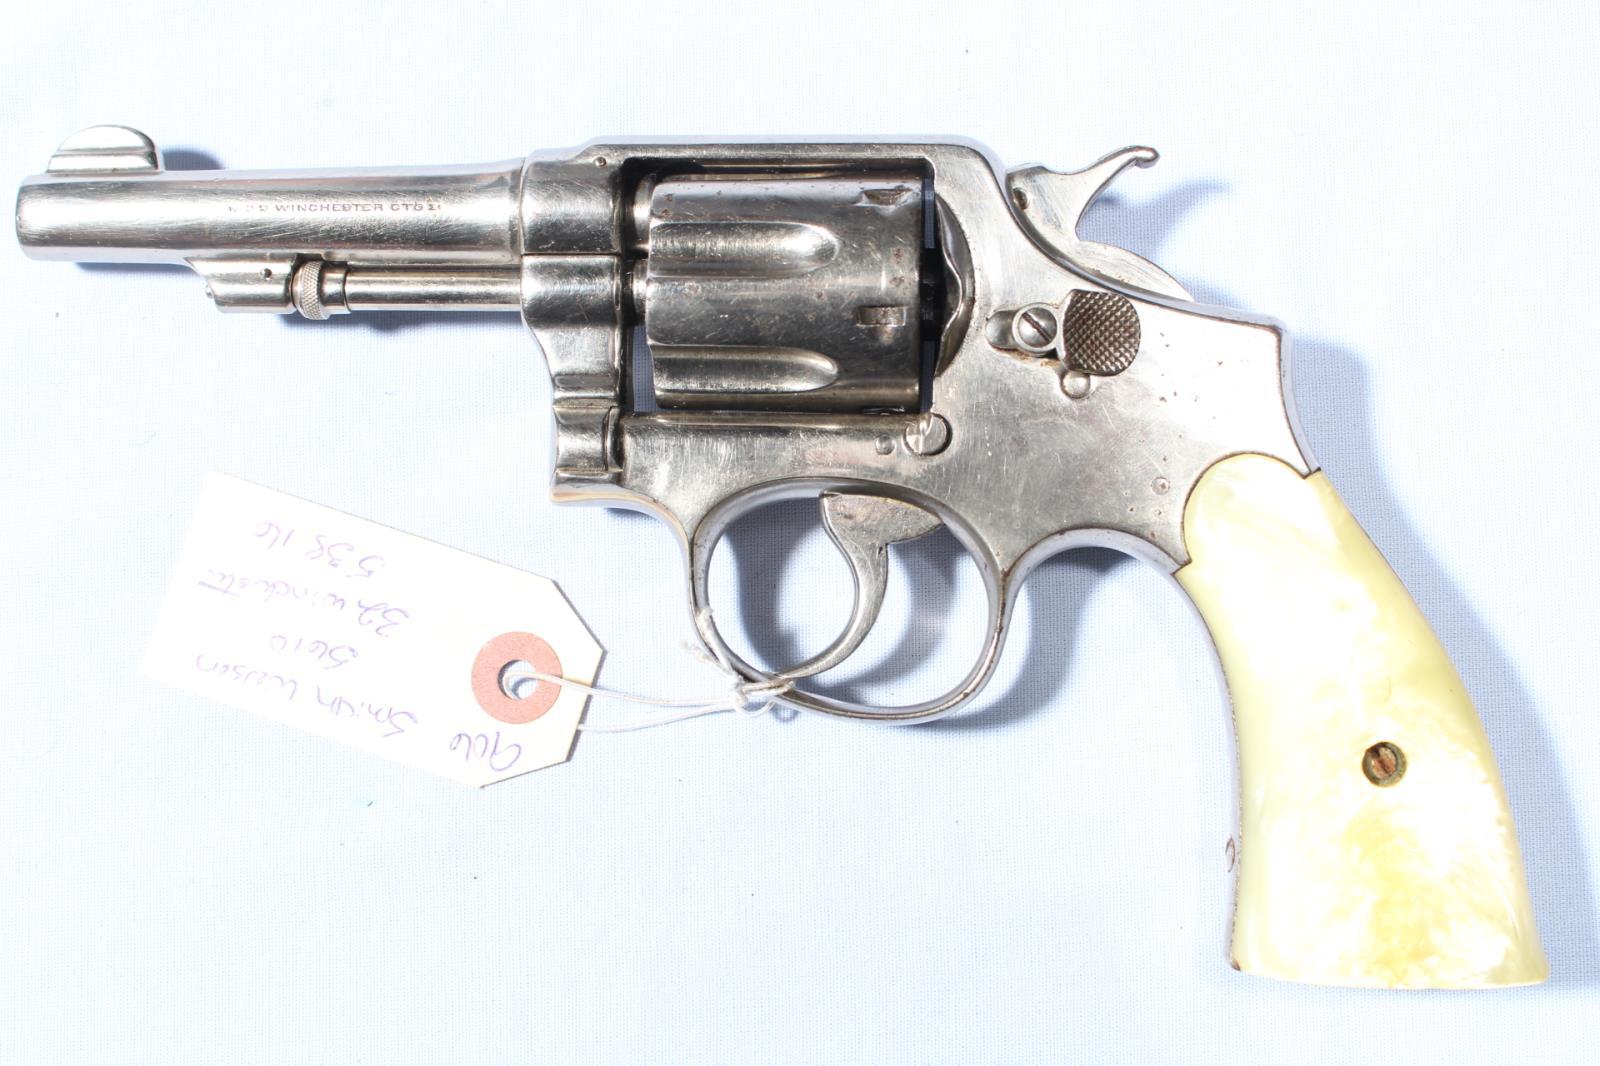 SMITH WESSON 5610, SN 53816